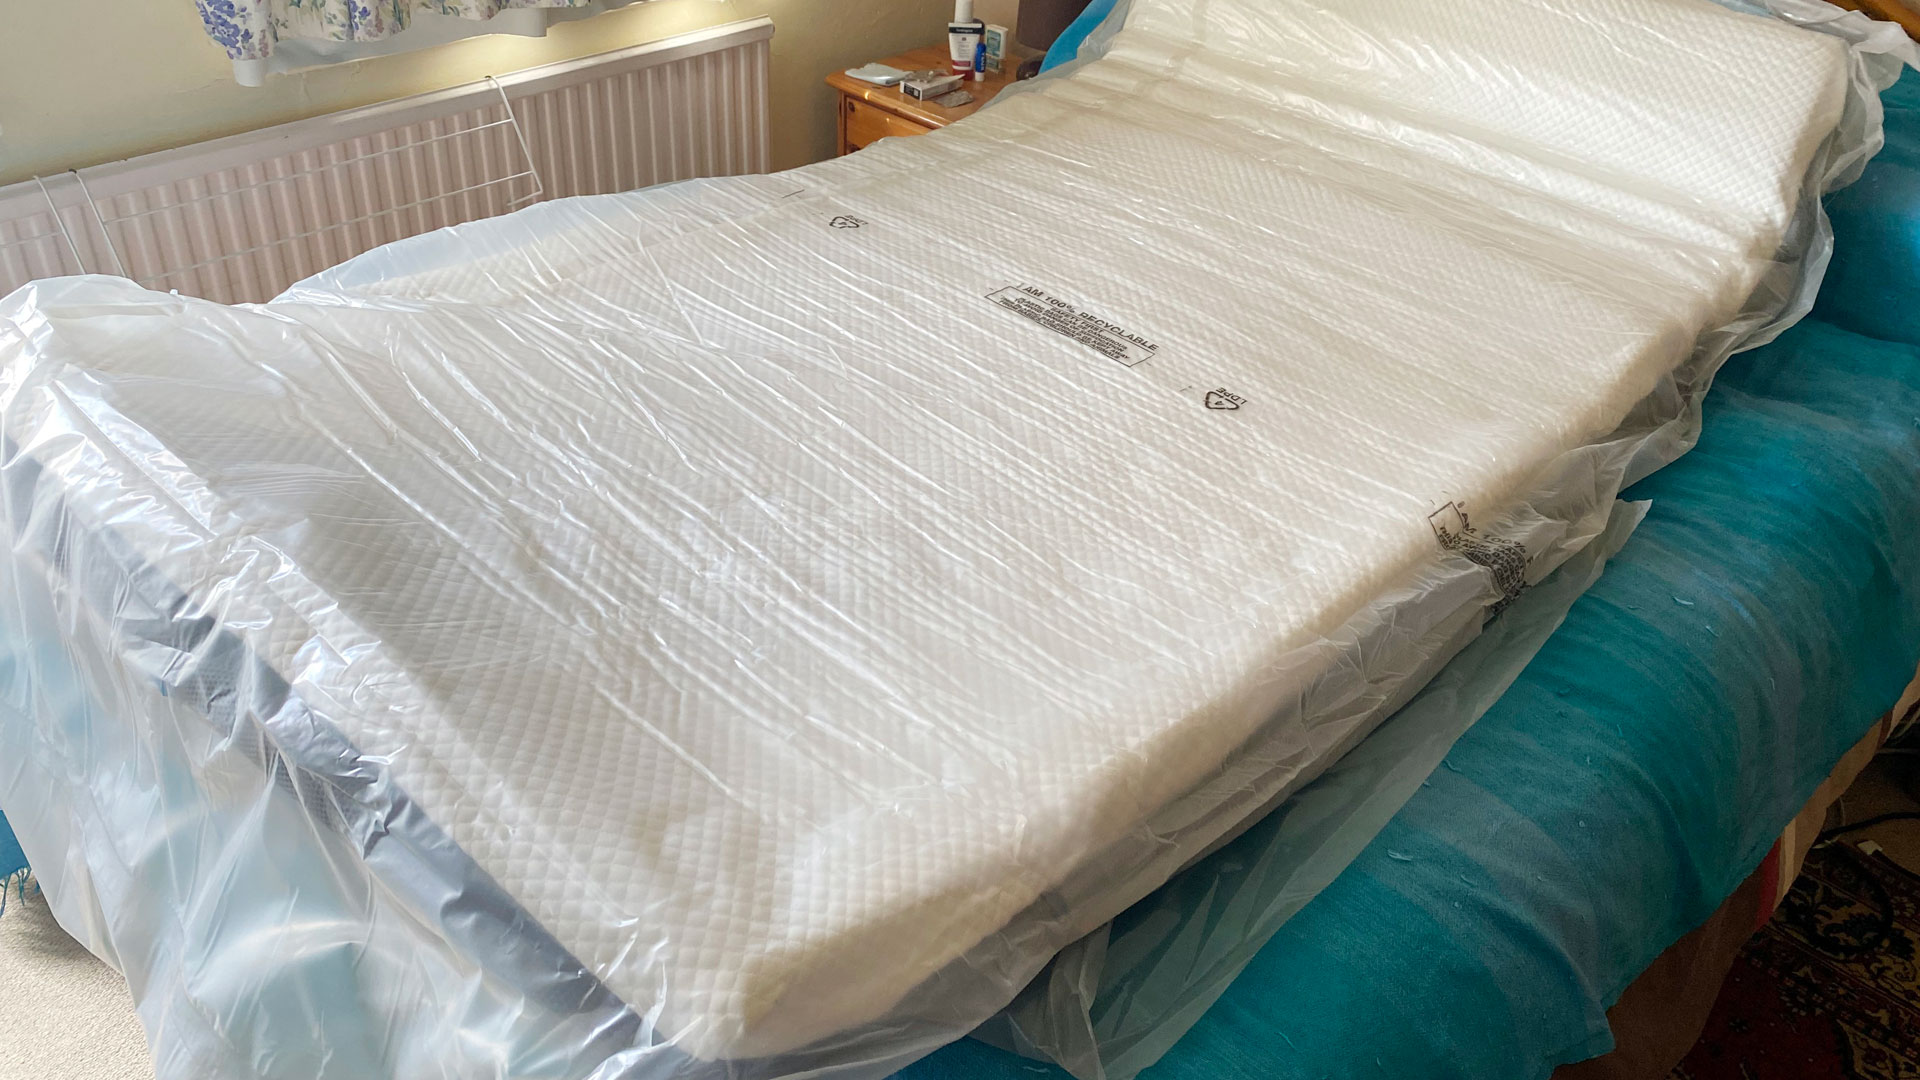 A Simbatex Foam Mattress laid out in its bag